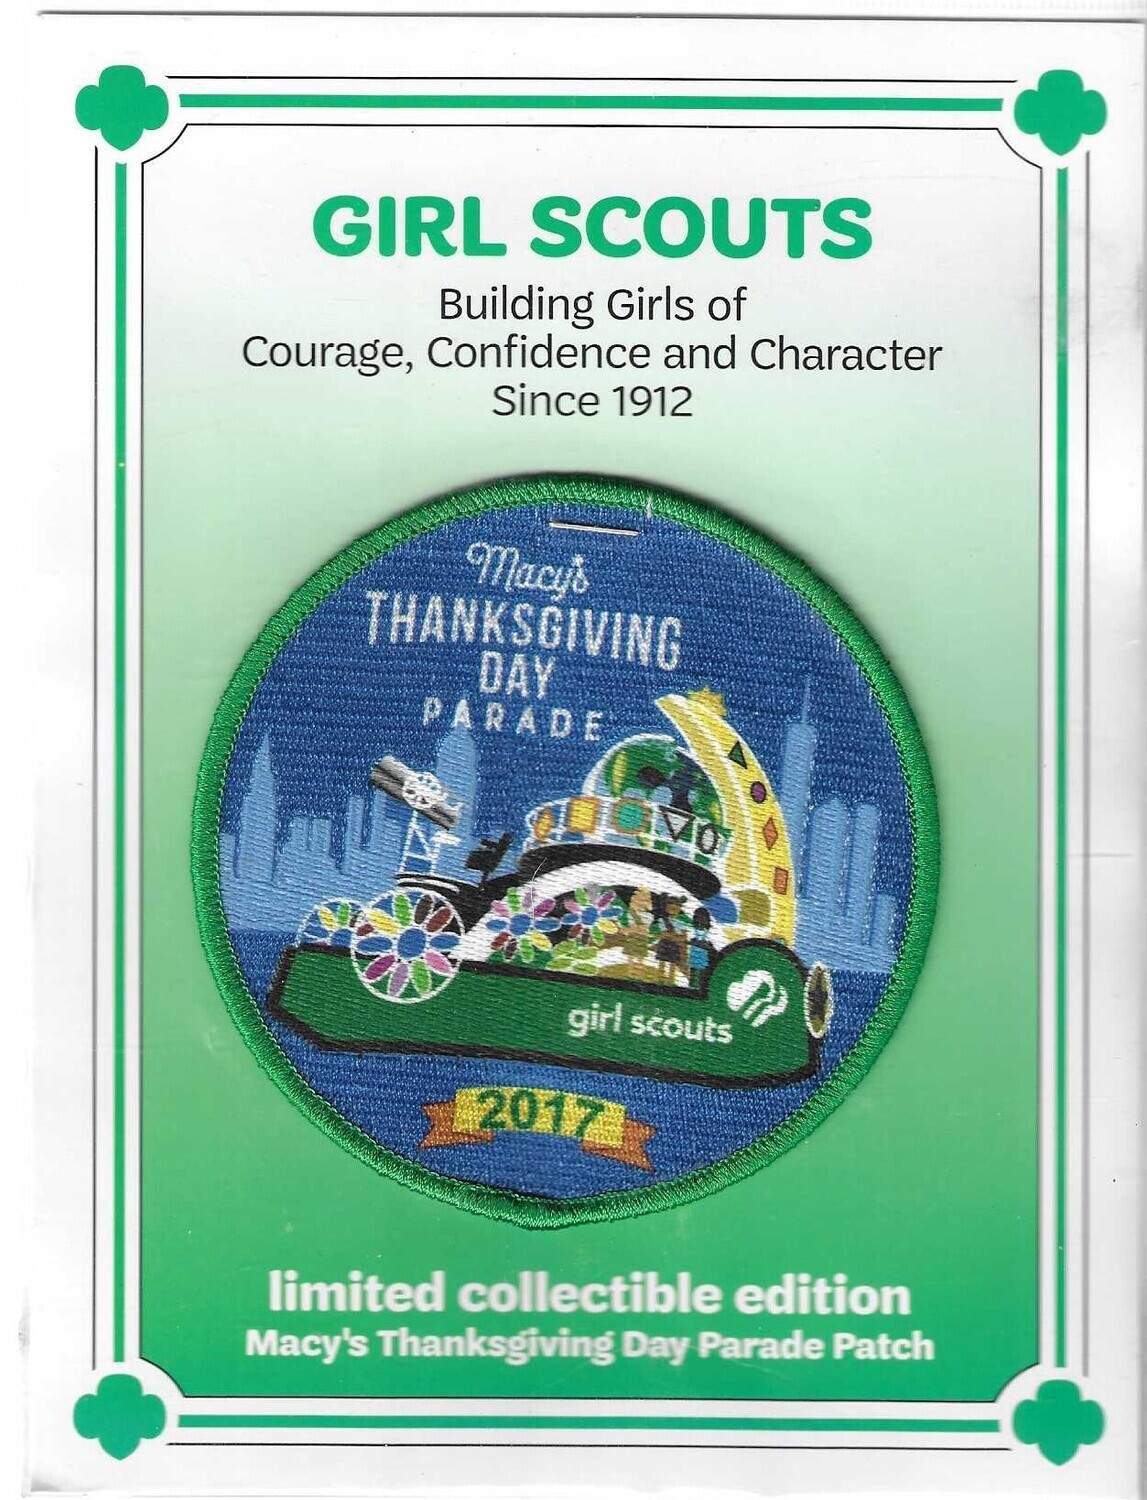 2017 Macy's Thanksgiving Day Parade LED collectors patch